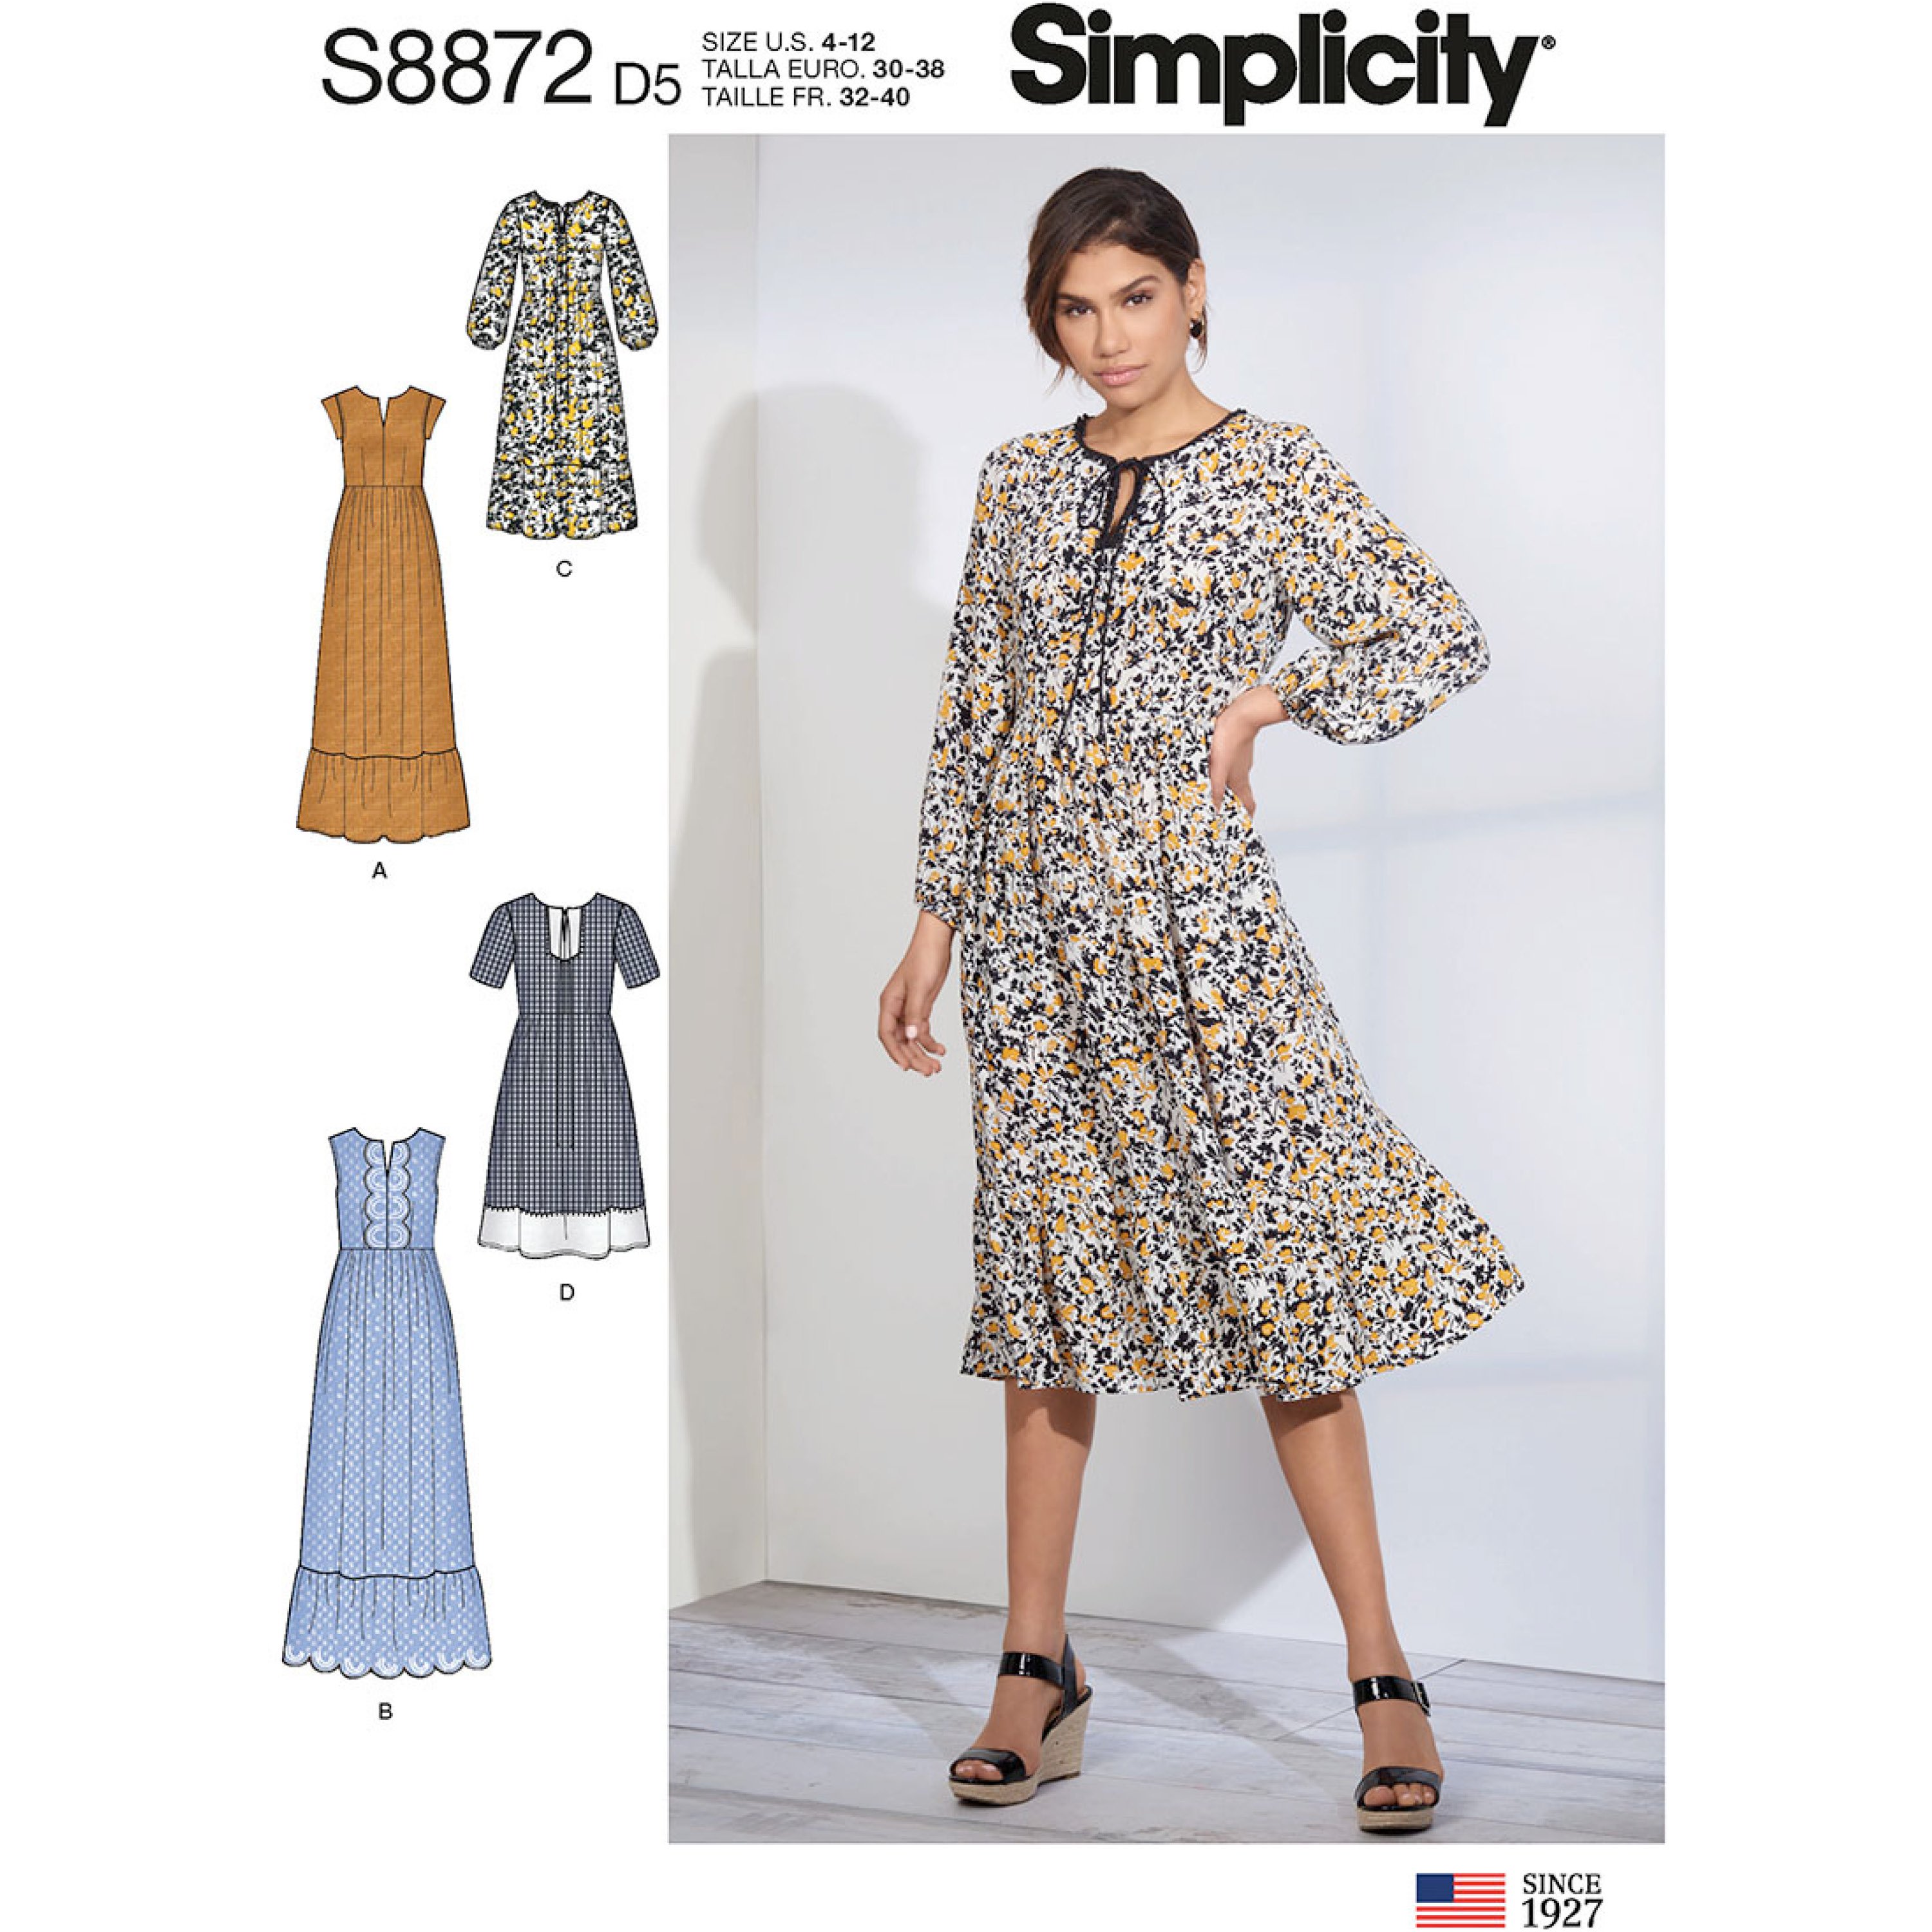 https://images.patternreview.com/sewing/patterns/simplicity/2019/8872/8872.jpg